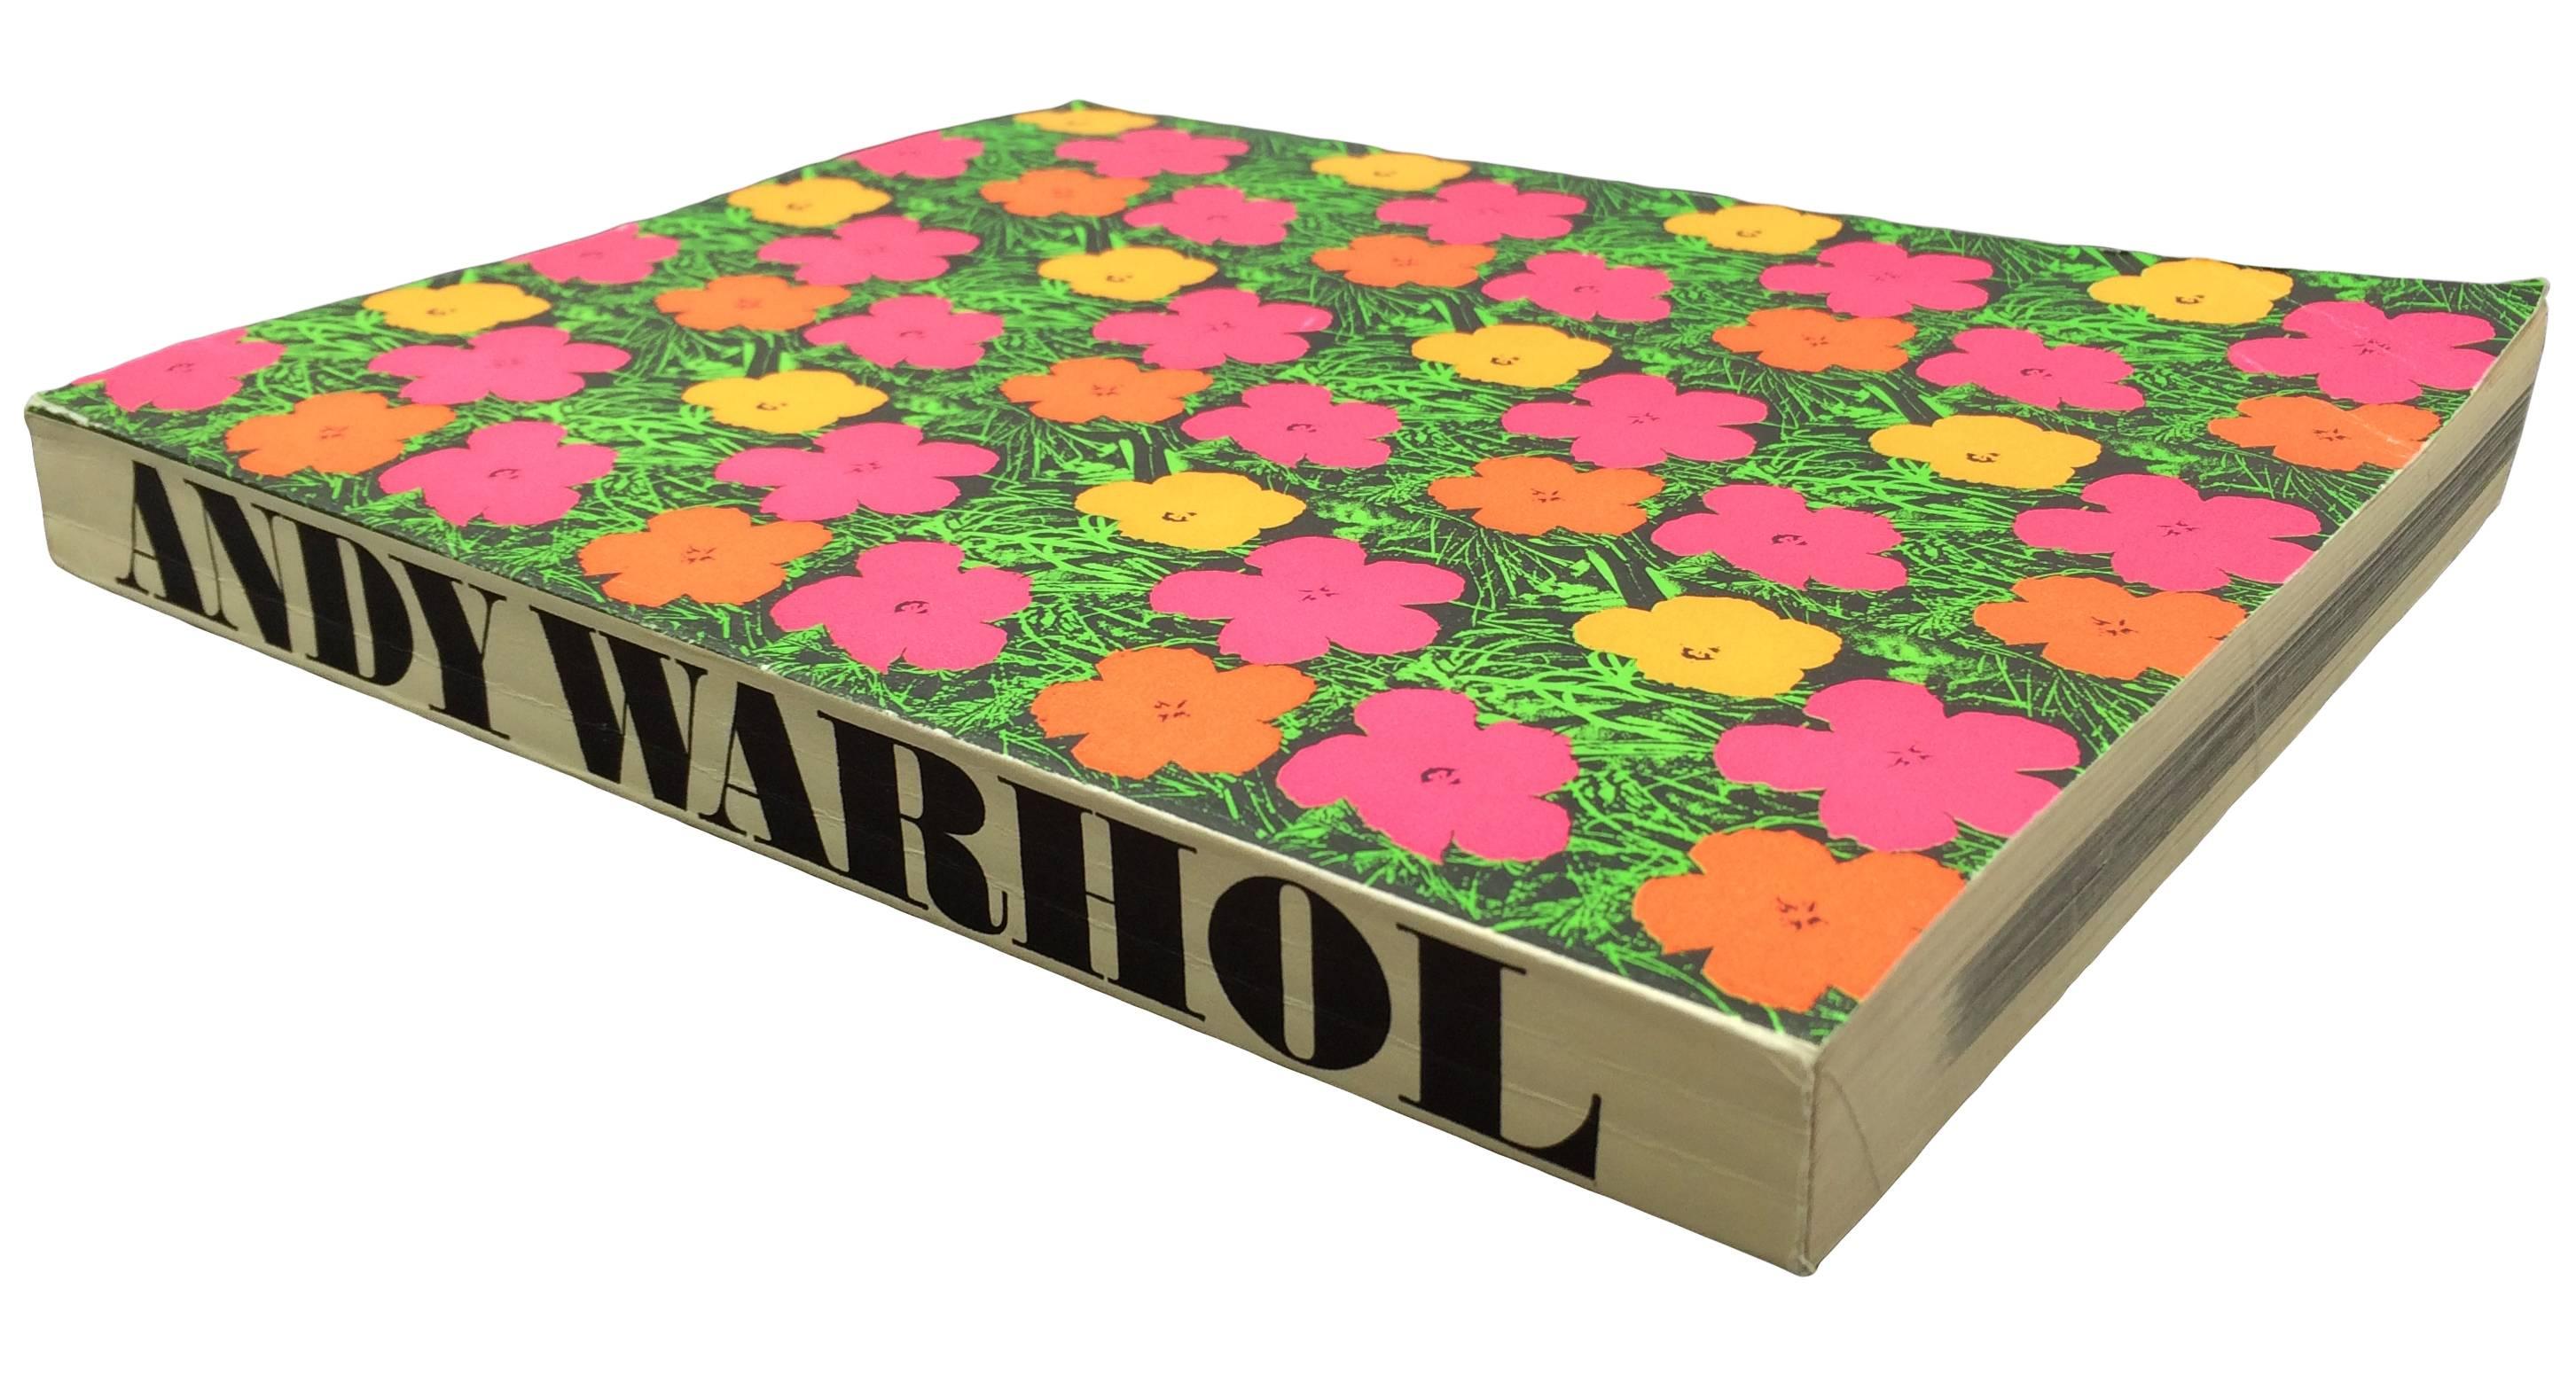 Swedish Andy Warhol 1st Edition Catalogue from Moderna Museet, Stockholm, 1968 For Sale